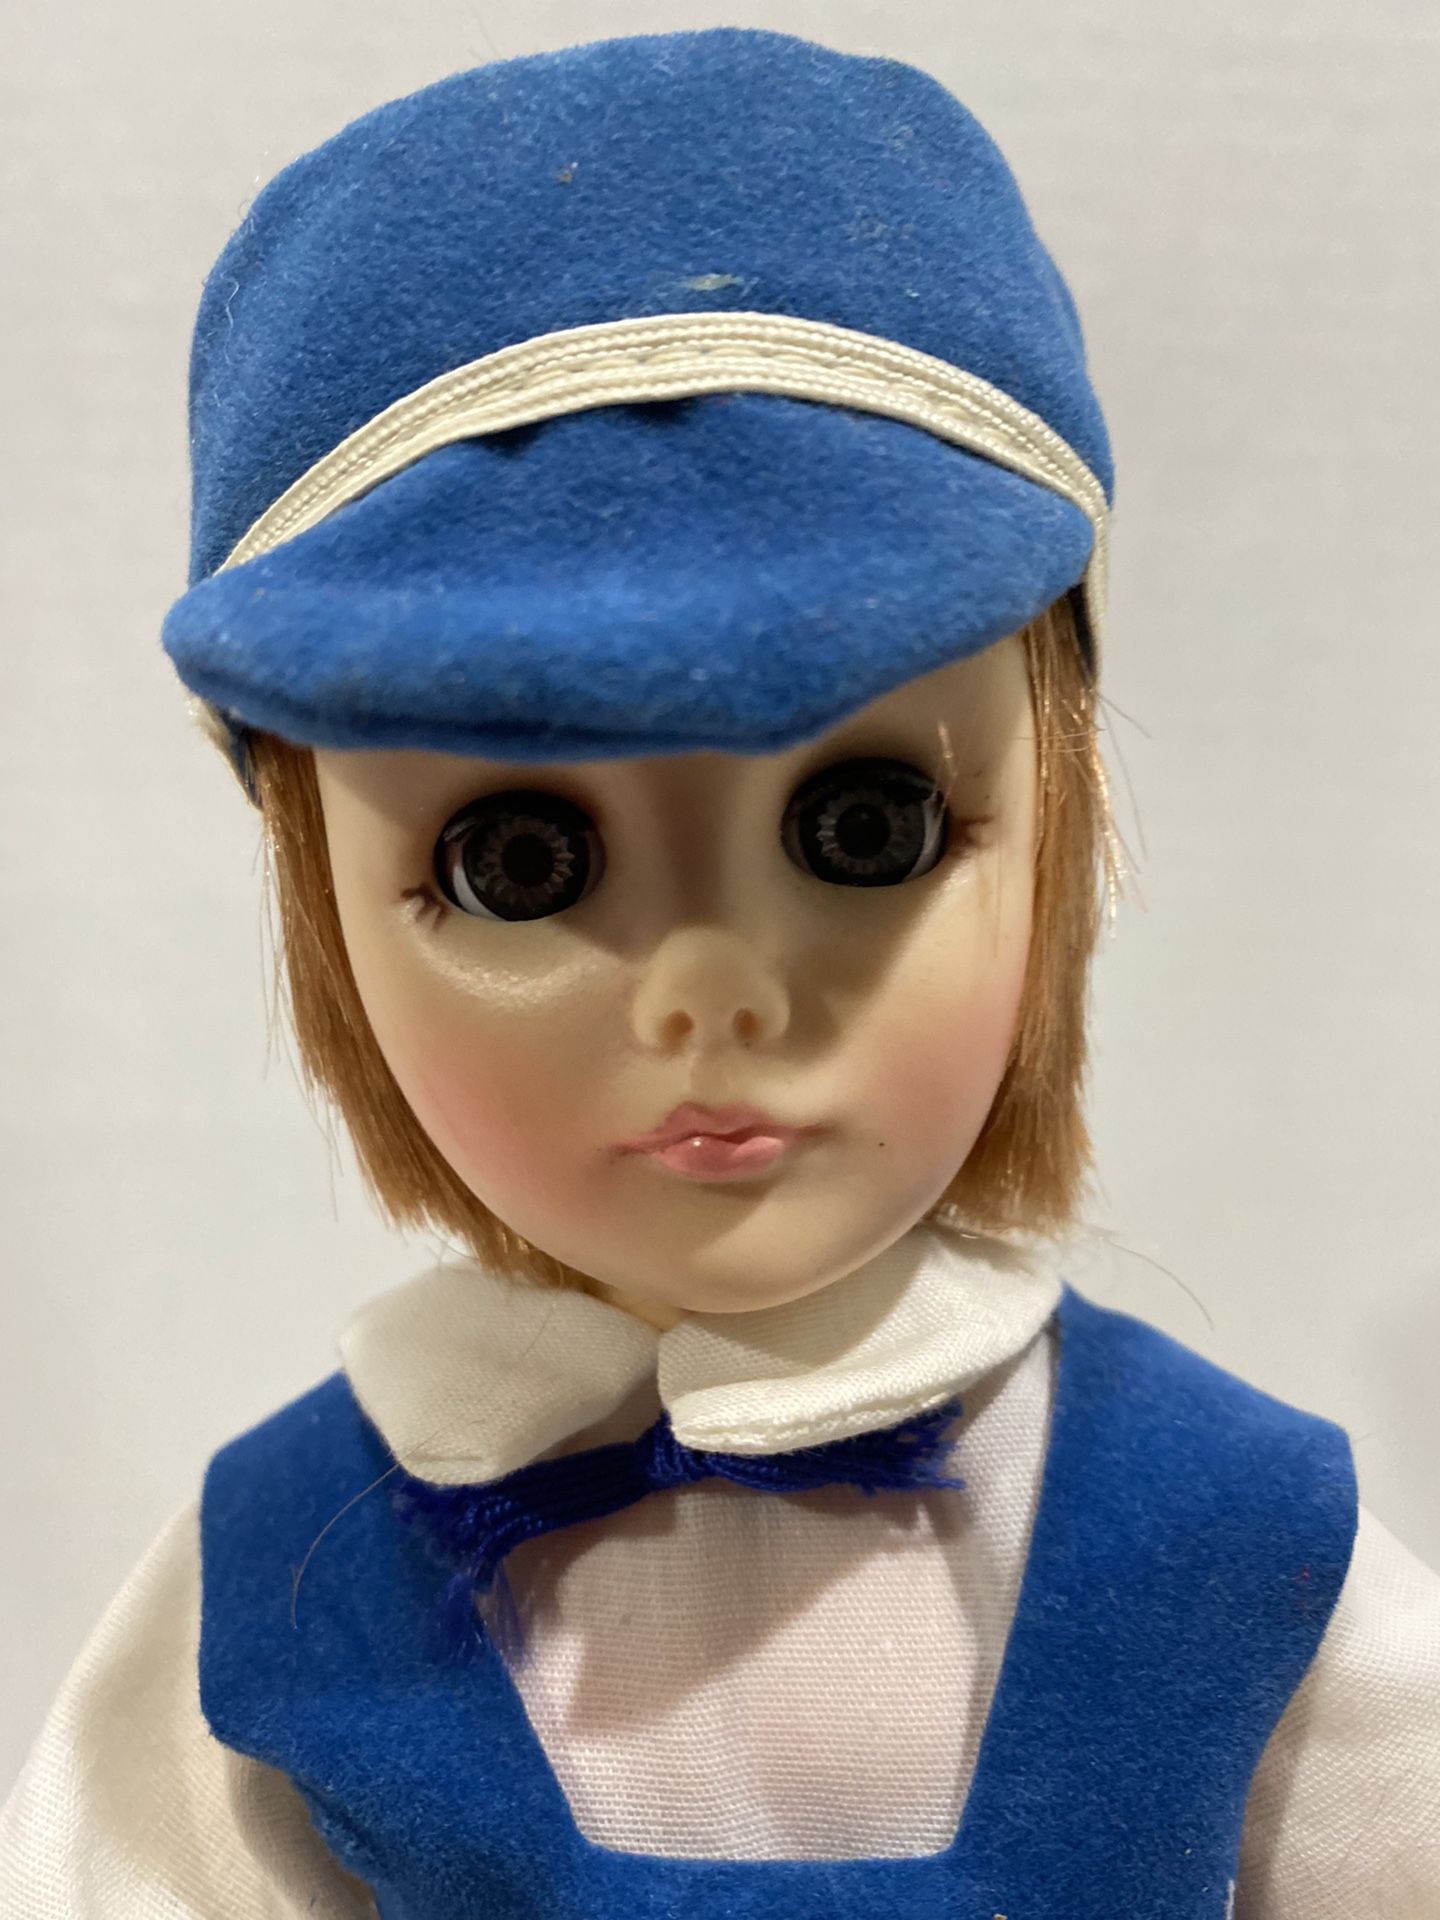 Vintage 1970’s Effanbee NY Jack Story Book Doll. All original costume. Very good condition.